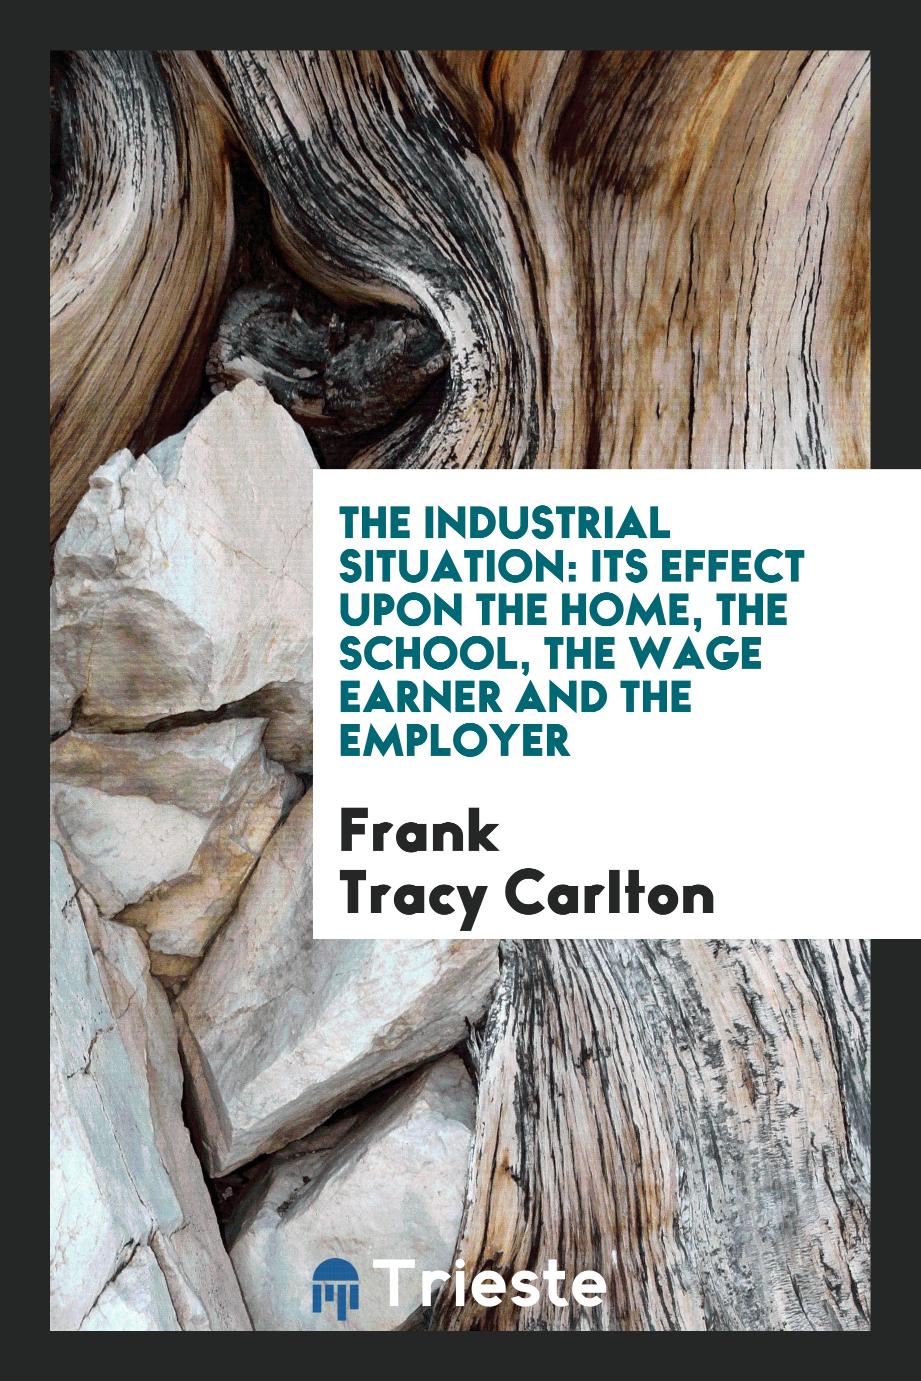 The Industrial Situation: Its Effect upon the Home, the School, the Wage Earner and the Employer